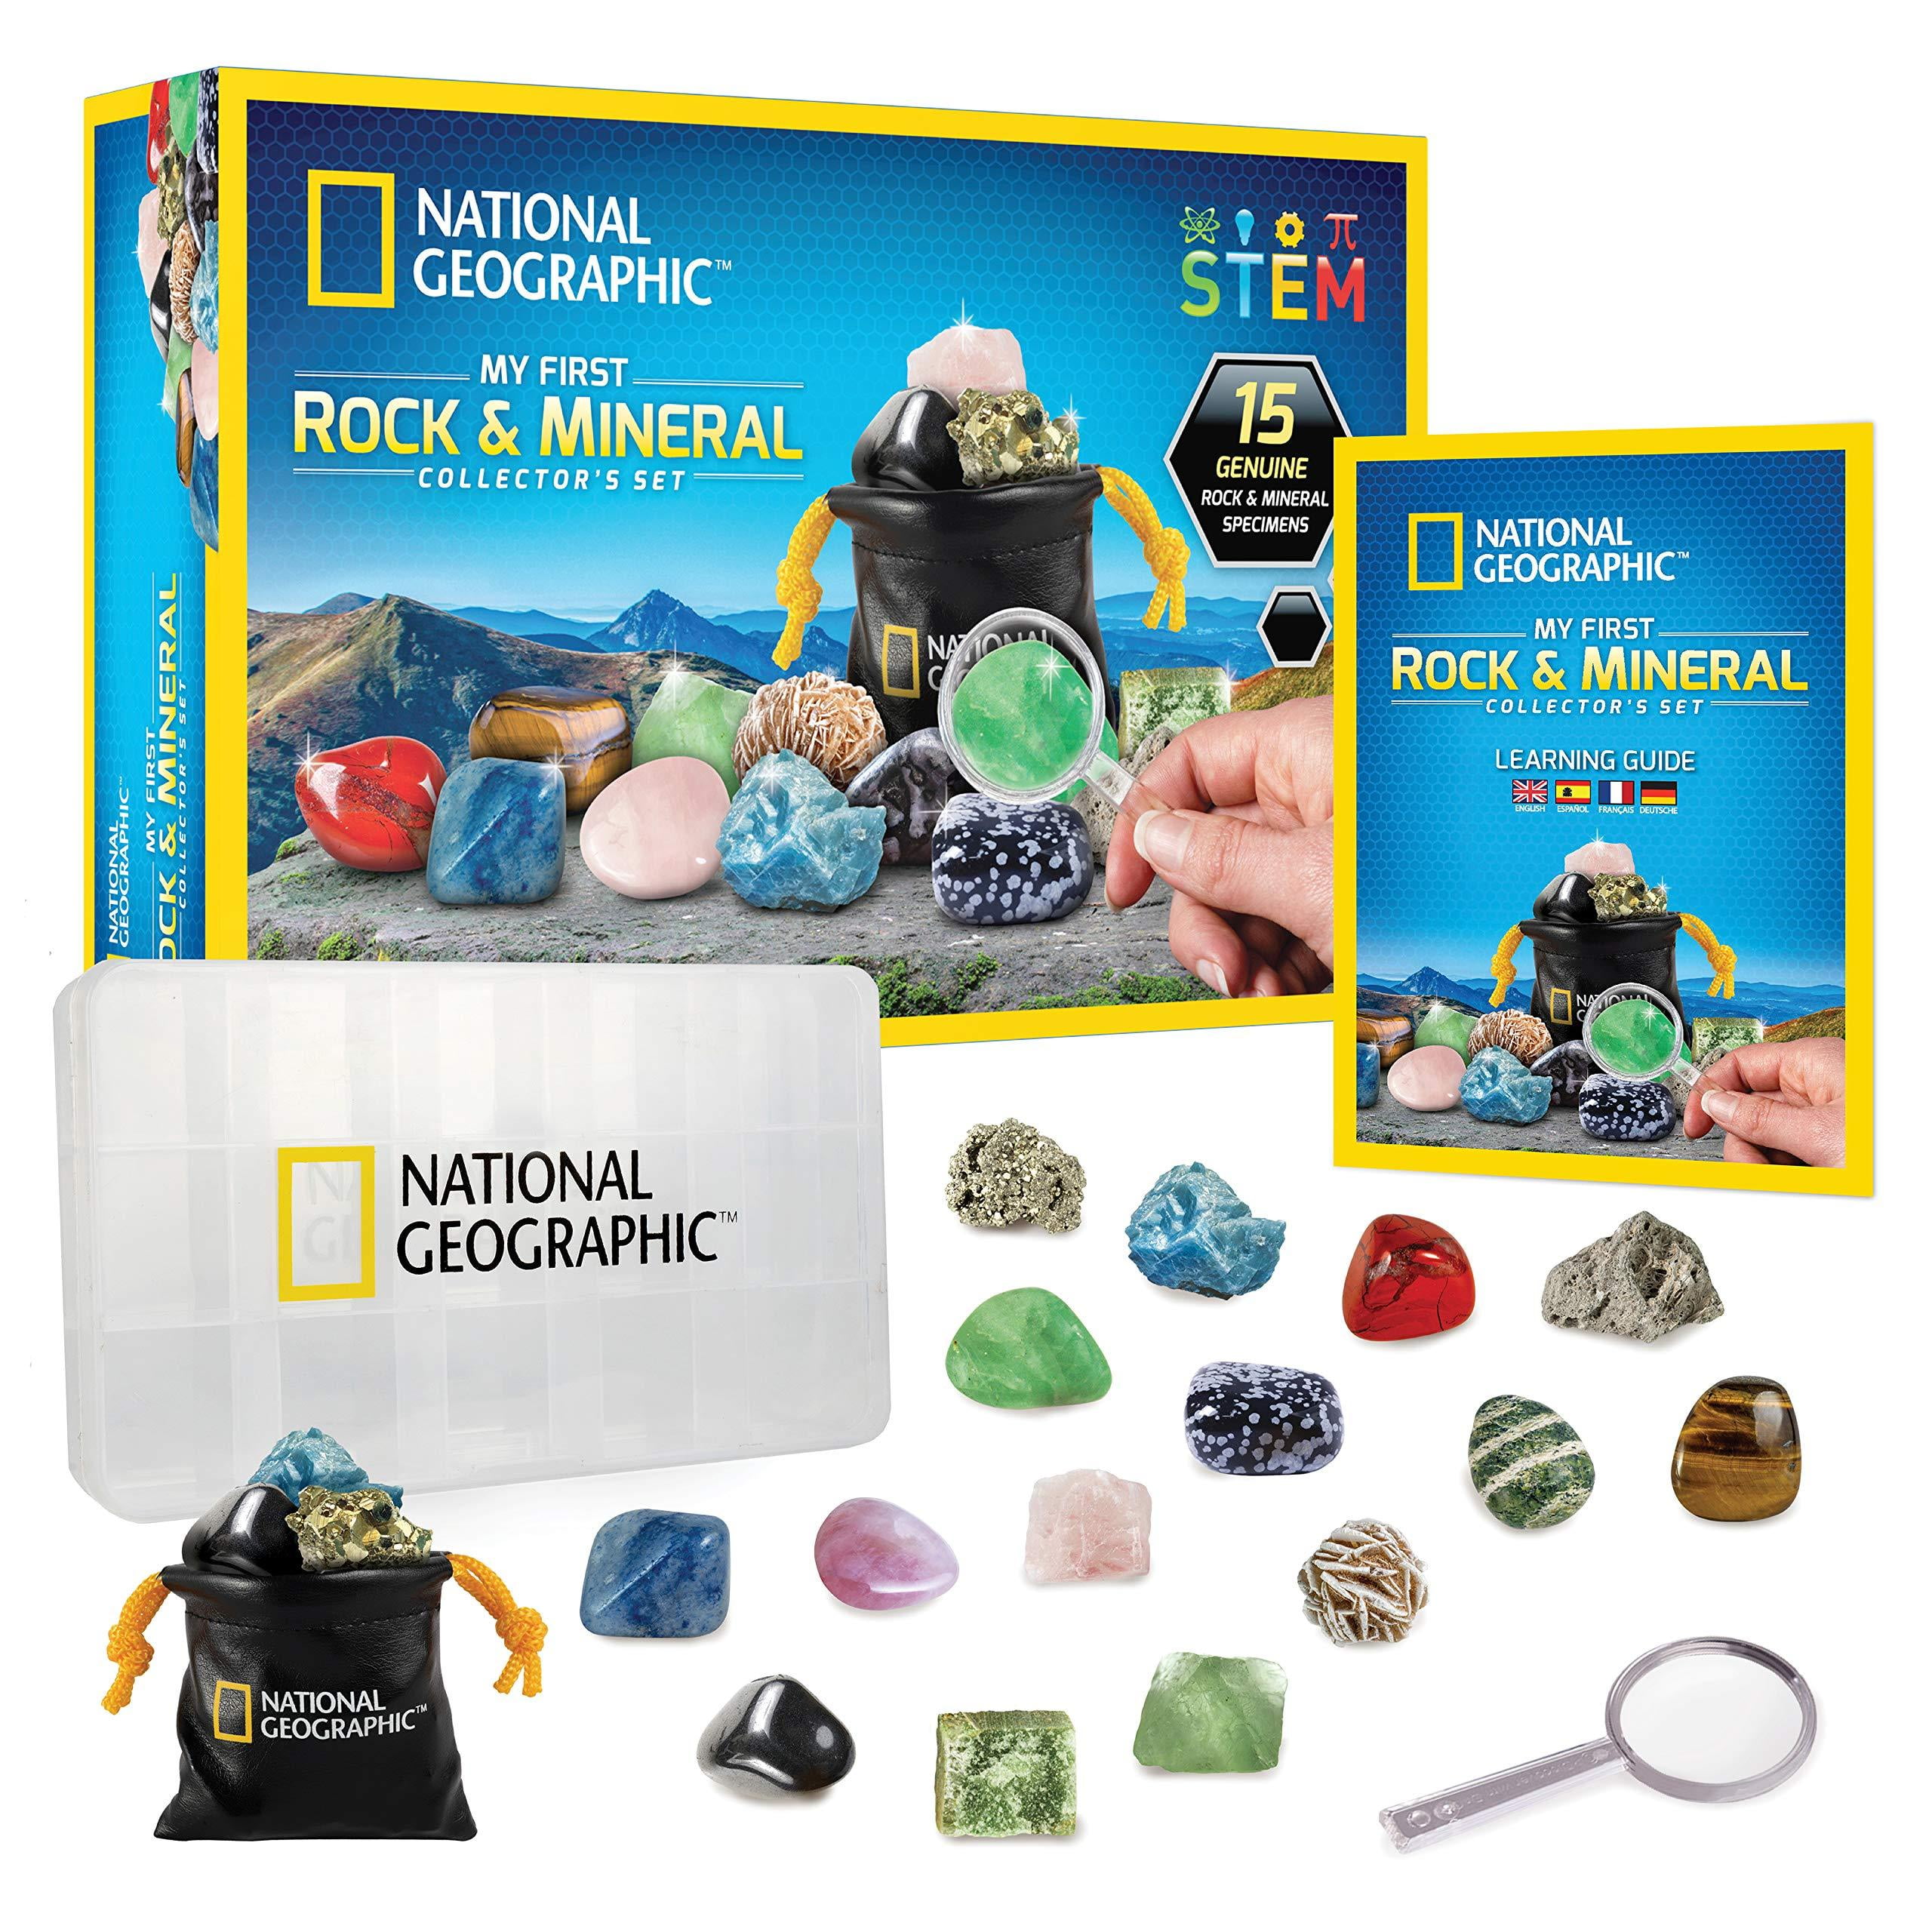 Discovery Fossils Mineral Geologist Kits Toy for Geology Science Earth Learn 